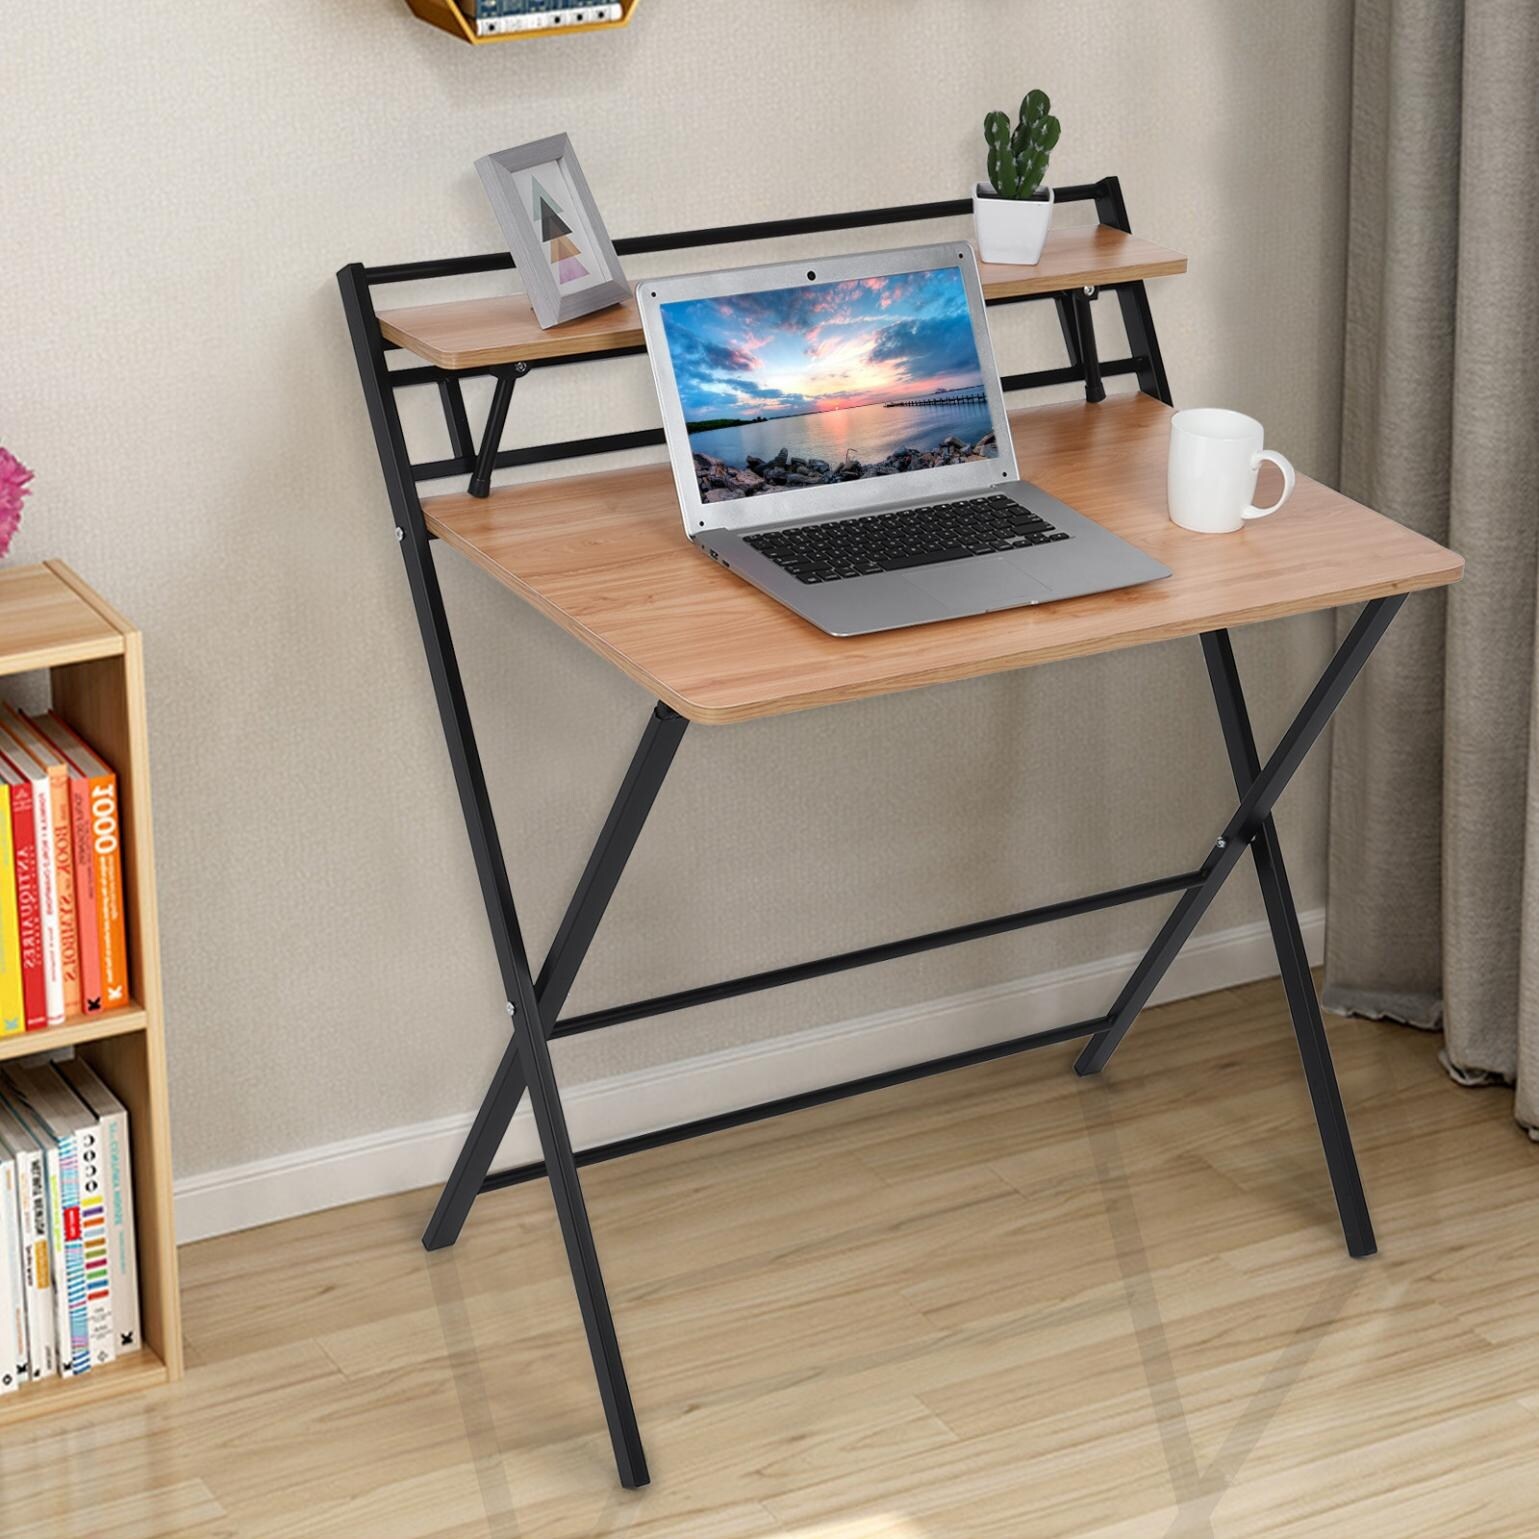 Espresso GreenForest Folding Desk and Coffee Table 2-Tier No Assembly Required Foldable Table Industrial Open Shelf Coffee Table with Metal Frame Brown